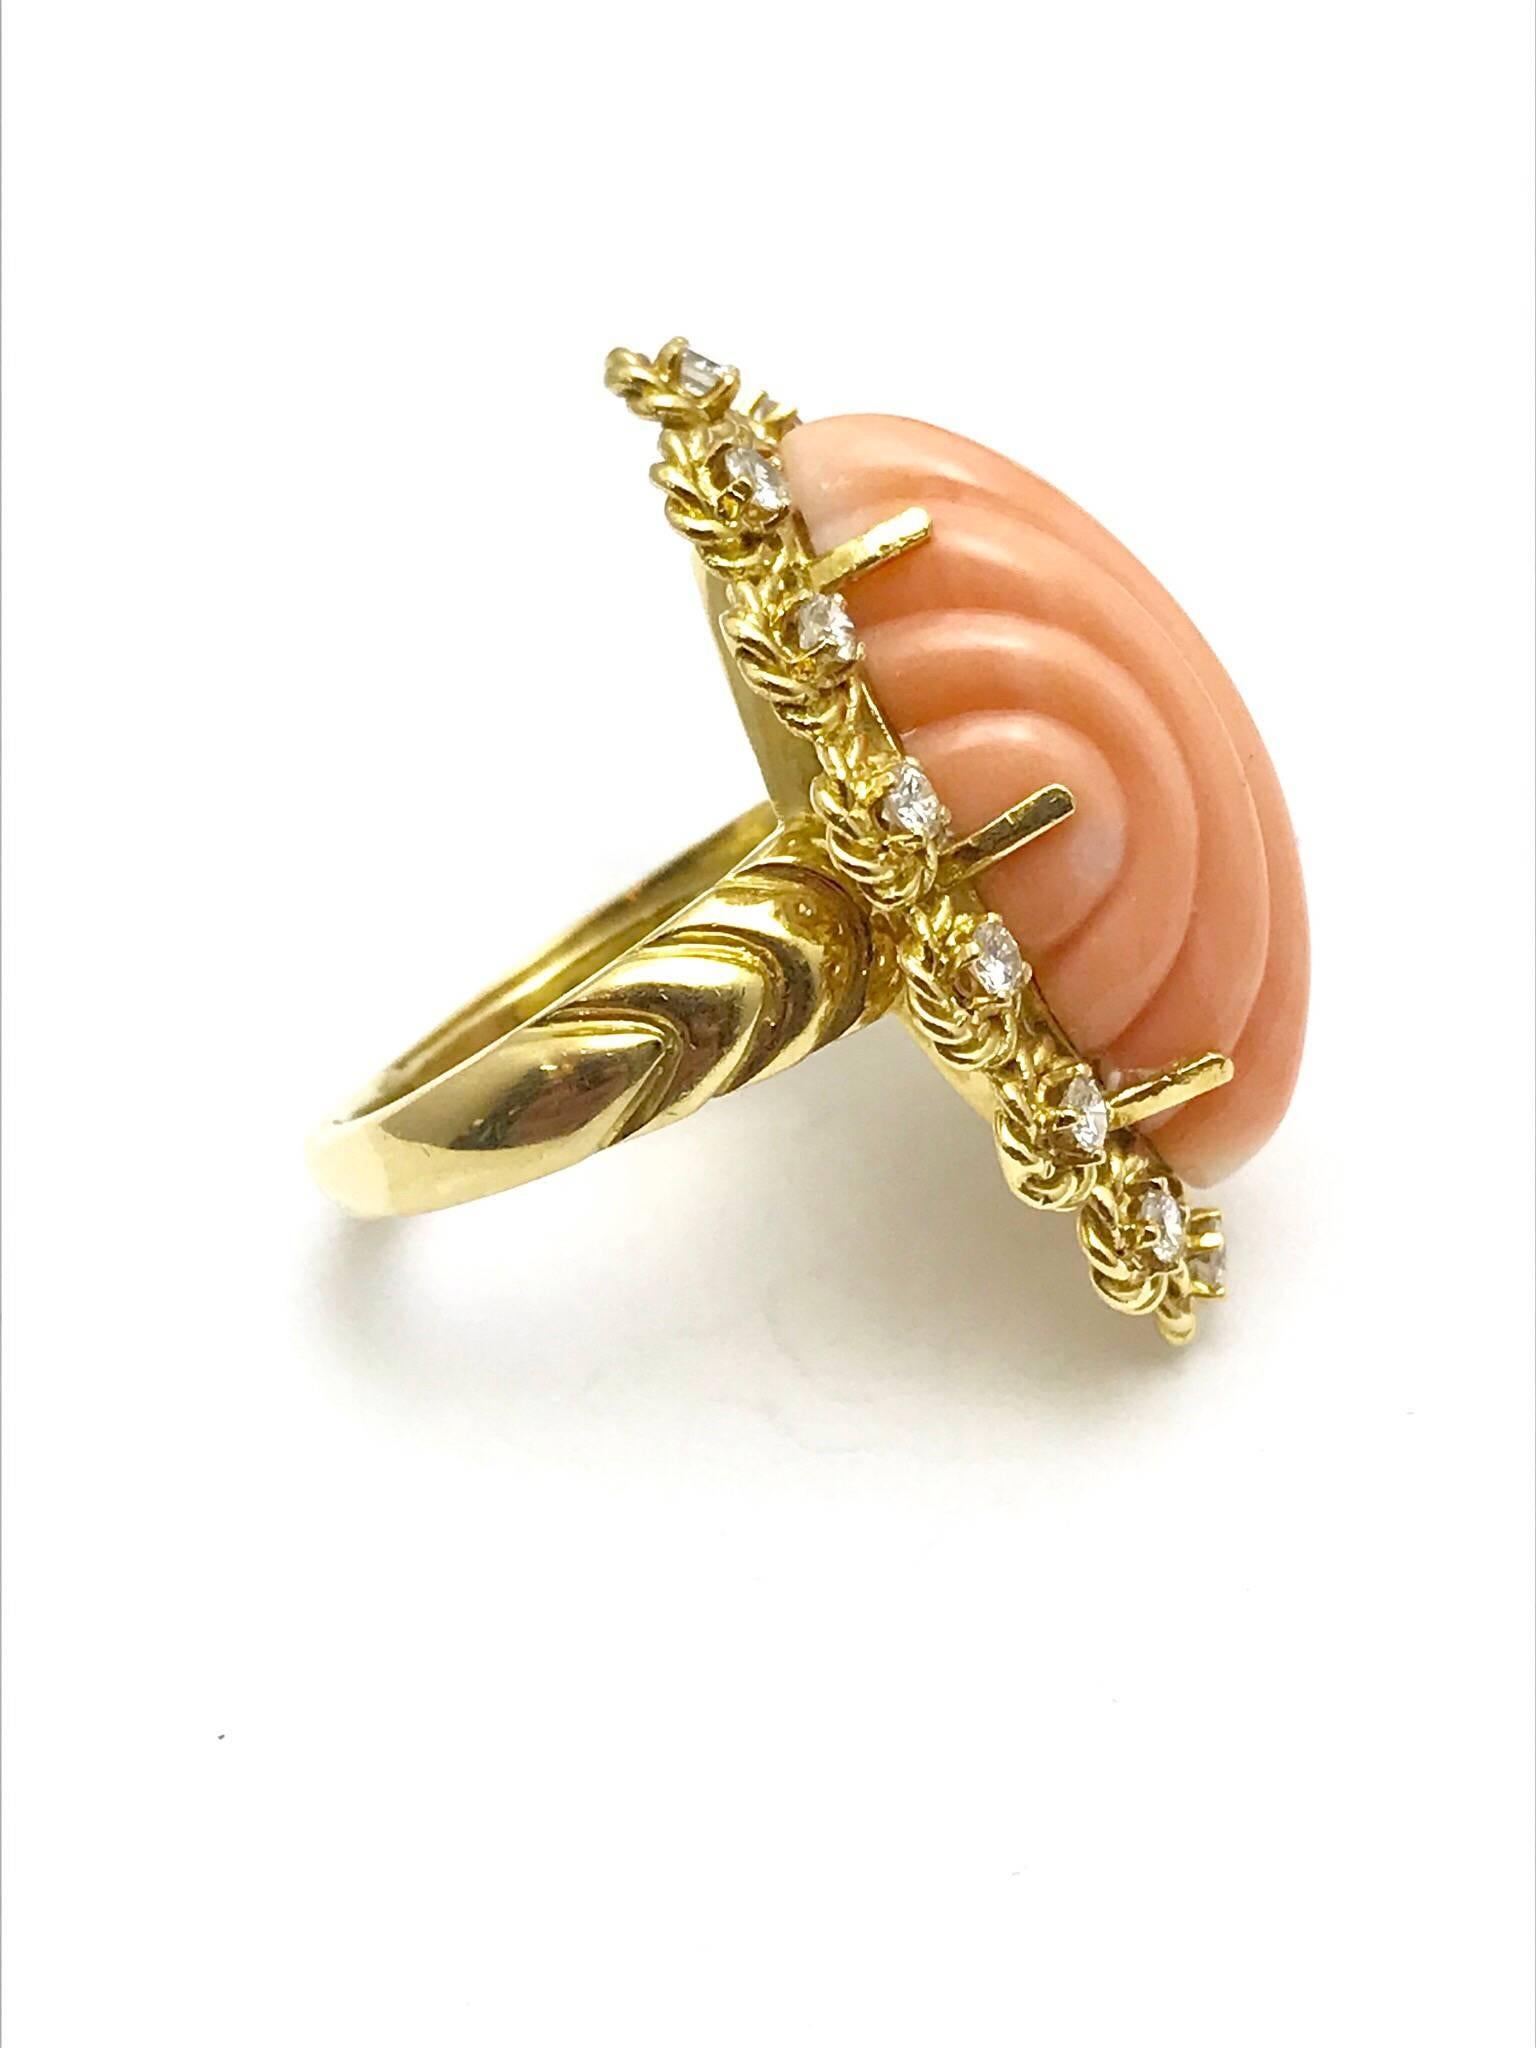 A carved angel skin coral and round brilliant diamond 18 karat yellow gold cocktail ring.  The coral is a carved cabochon marquise shape set with six prongs, framed by a single row of diamonds in a floral pattern.  The coral is 25.50 x 12.20 x